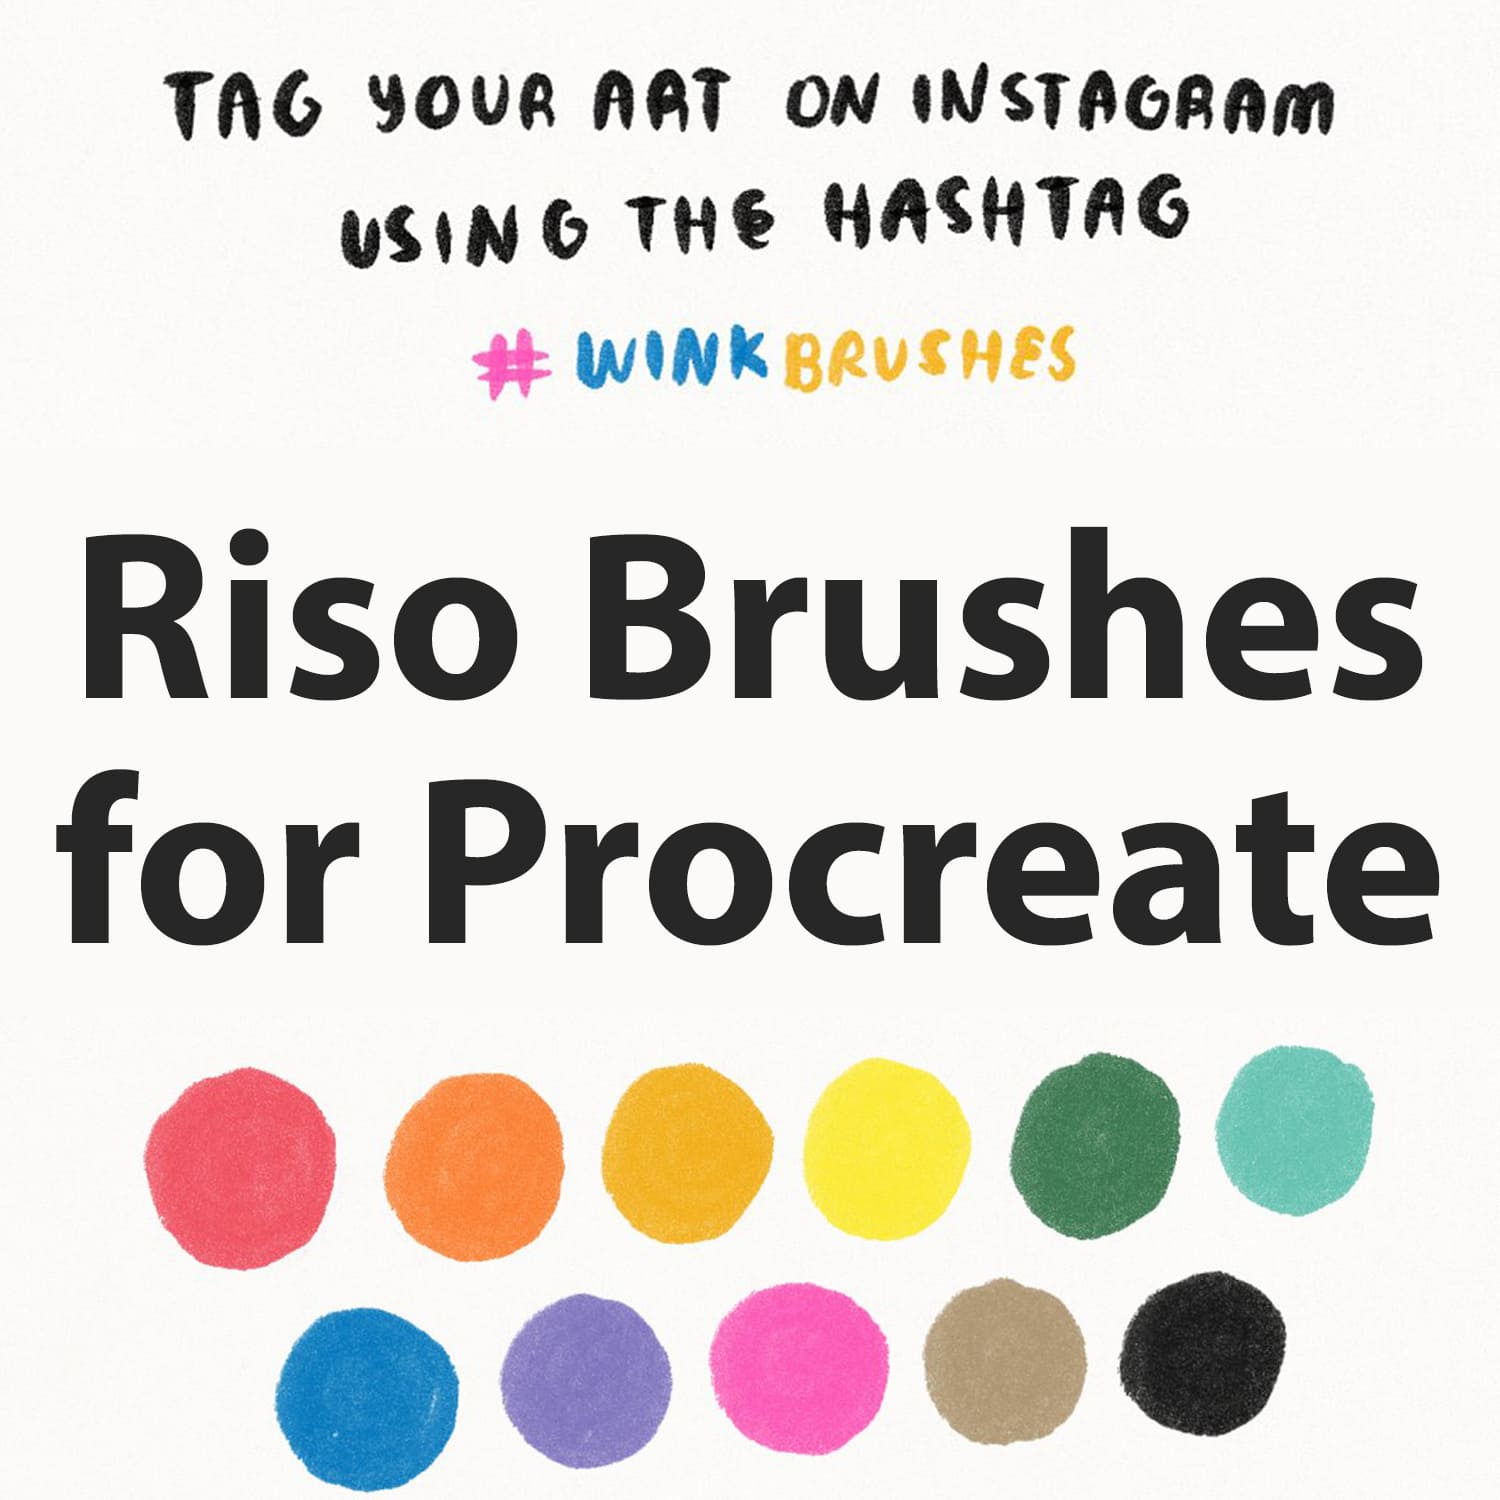 Riso Brushes For Procreate - Texture Preview.